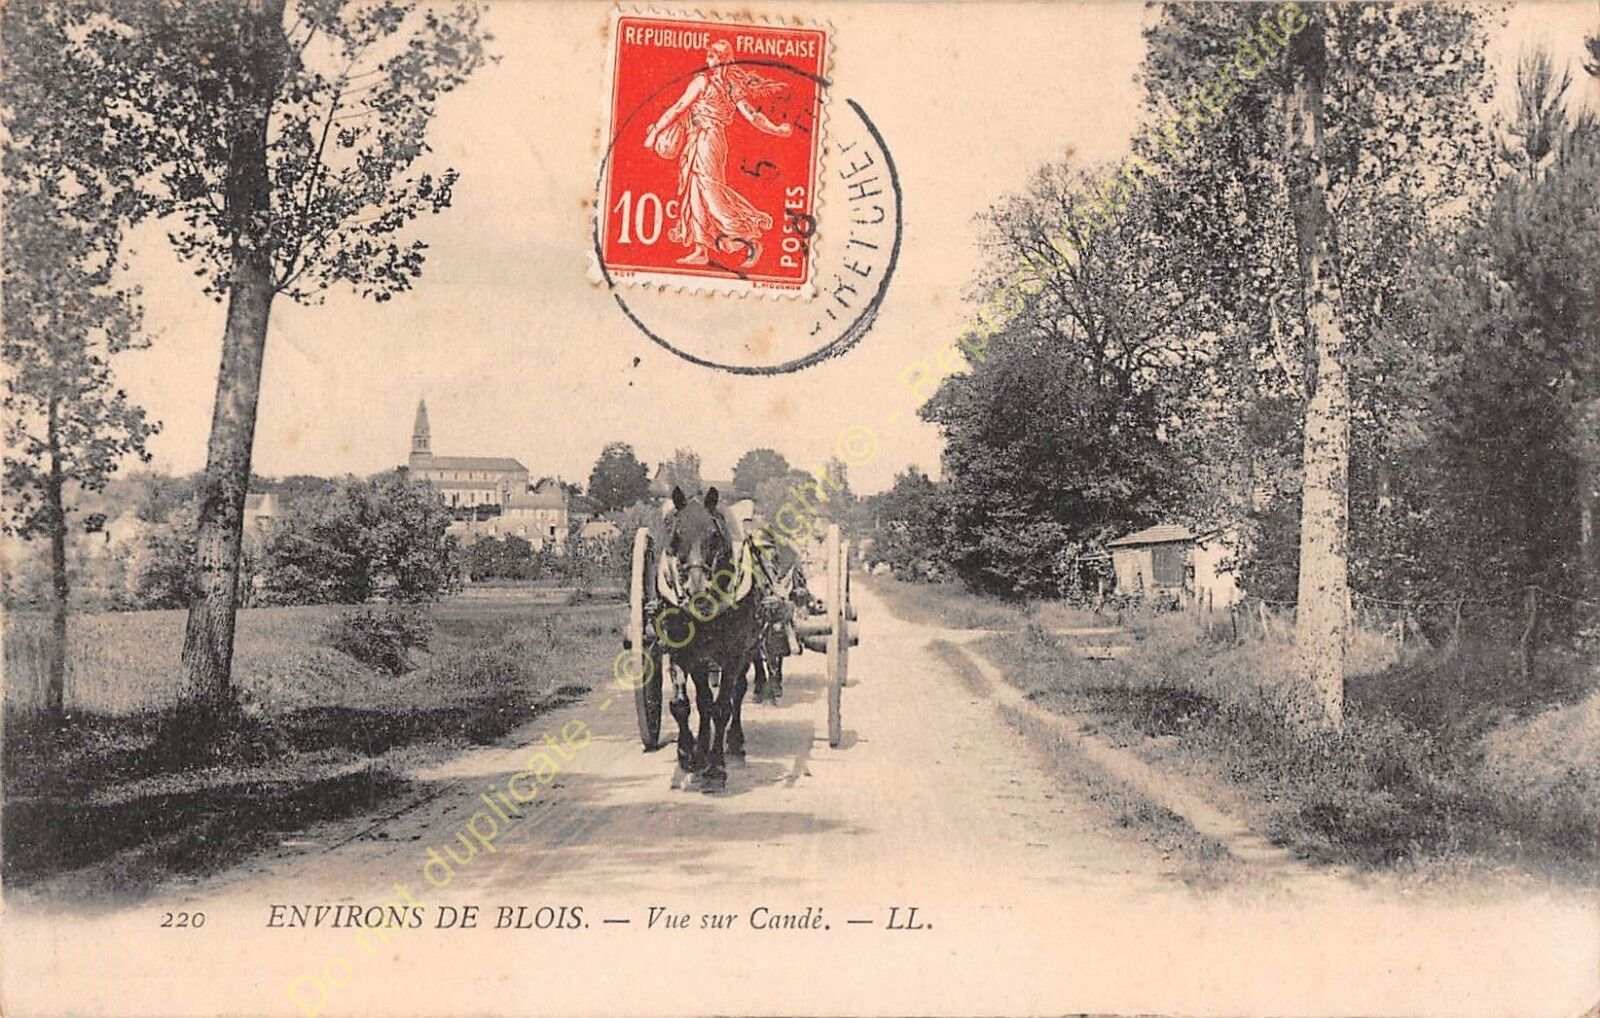 CPA 41120 CANDED ON BEUVRON around Blois coupling edit LL ca1908